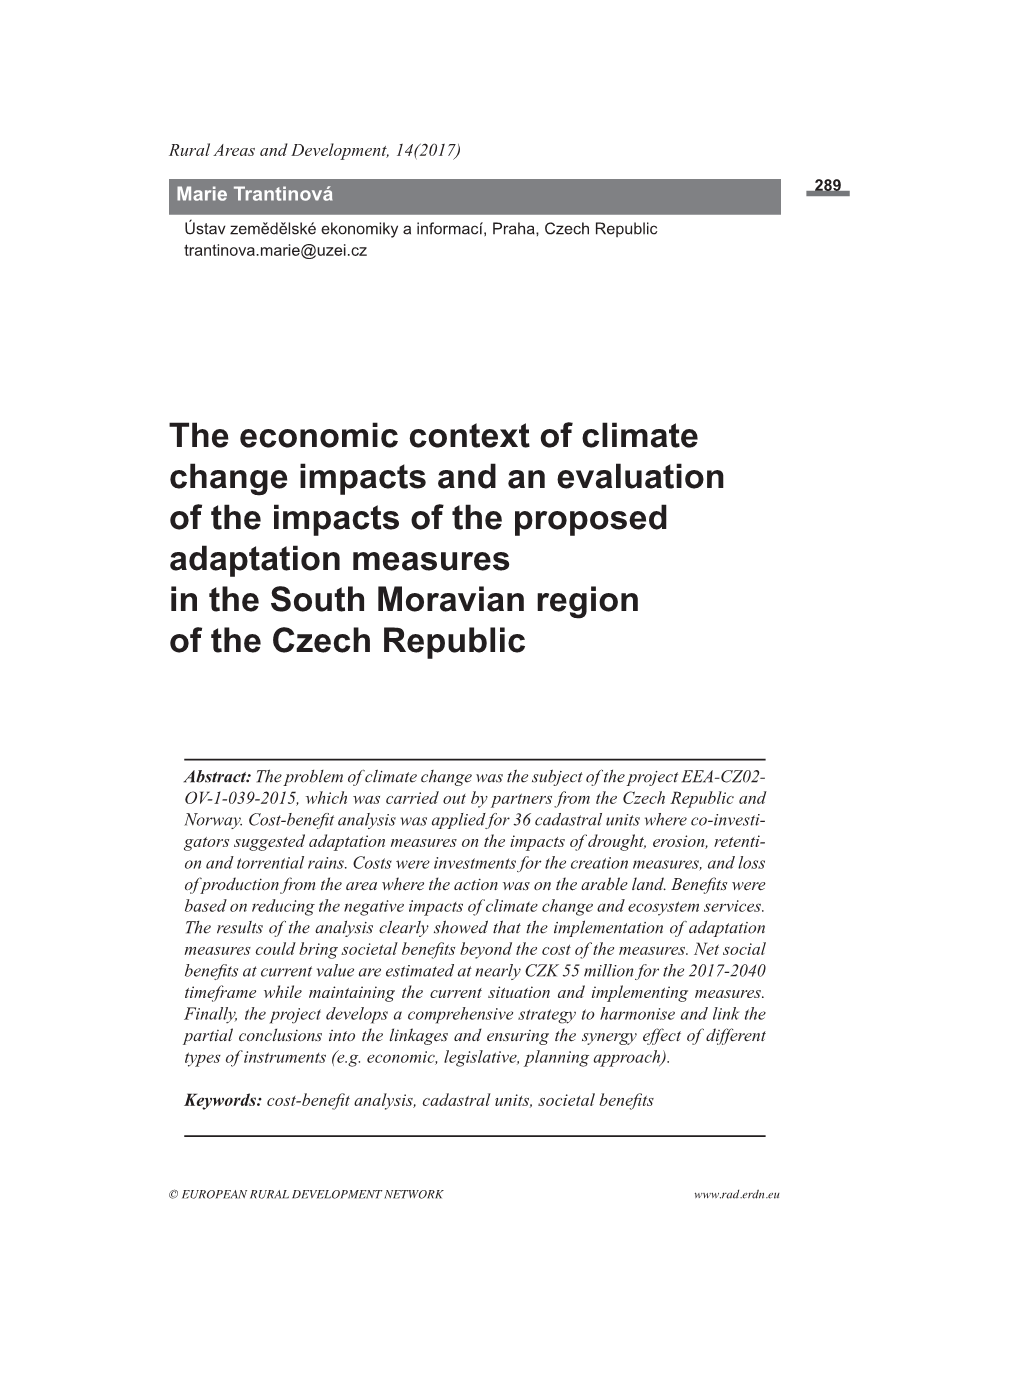 The Economic Context of Climate Change Impacts and an Evaluation of the Impacts of the Proposed Adaptation Measures in the South Moravian Region of the Czech Republic